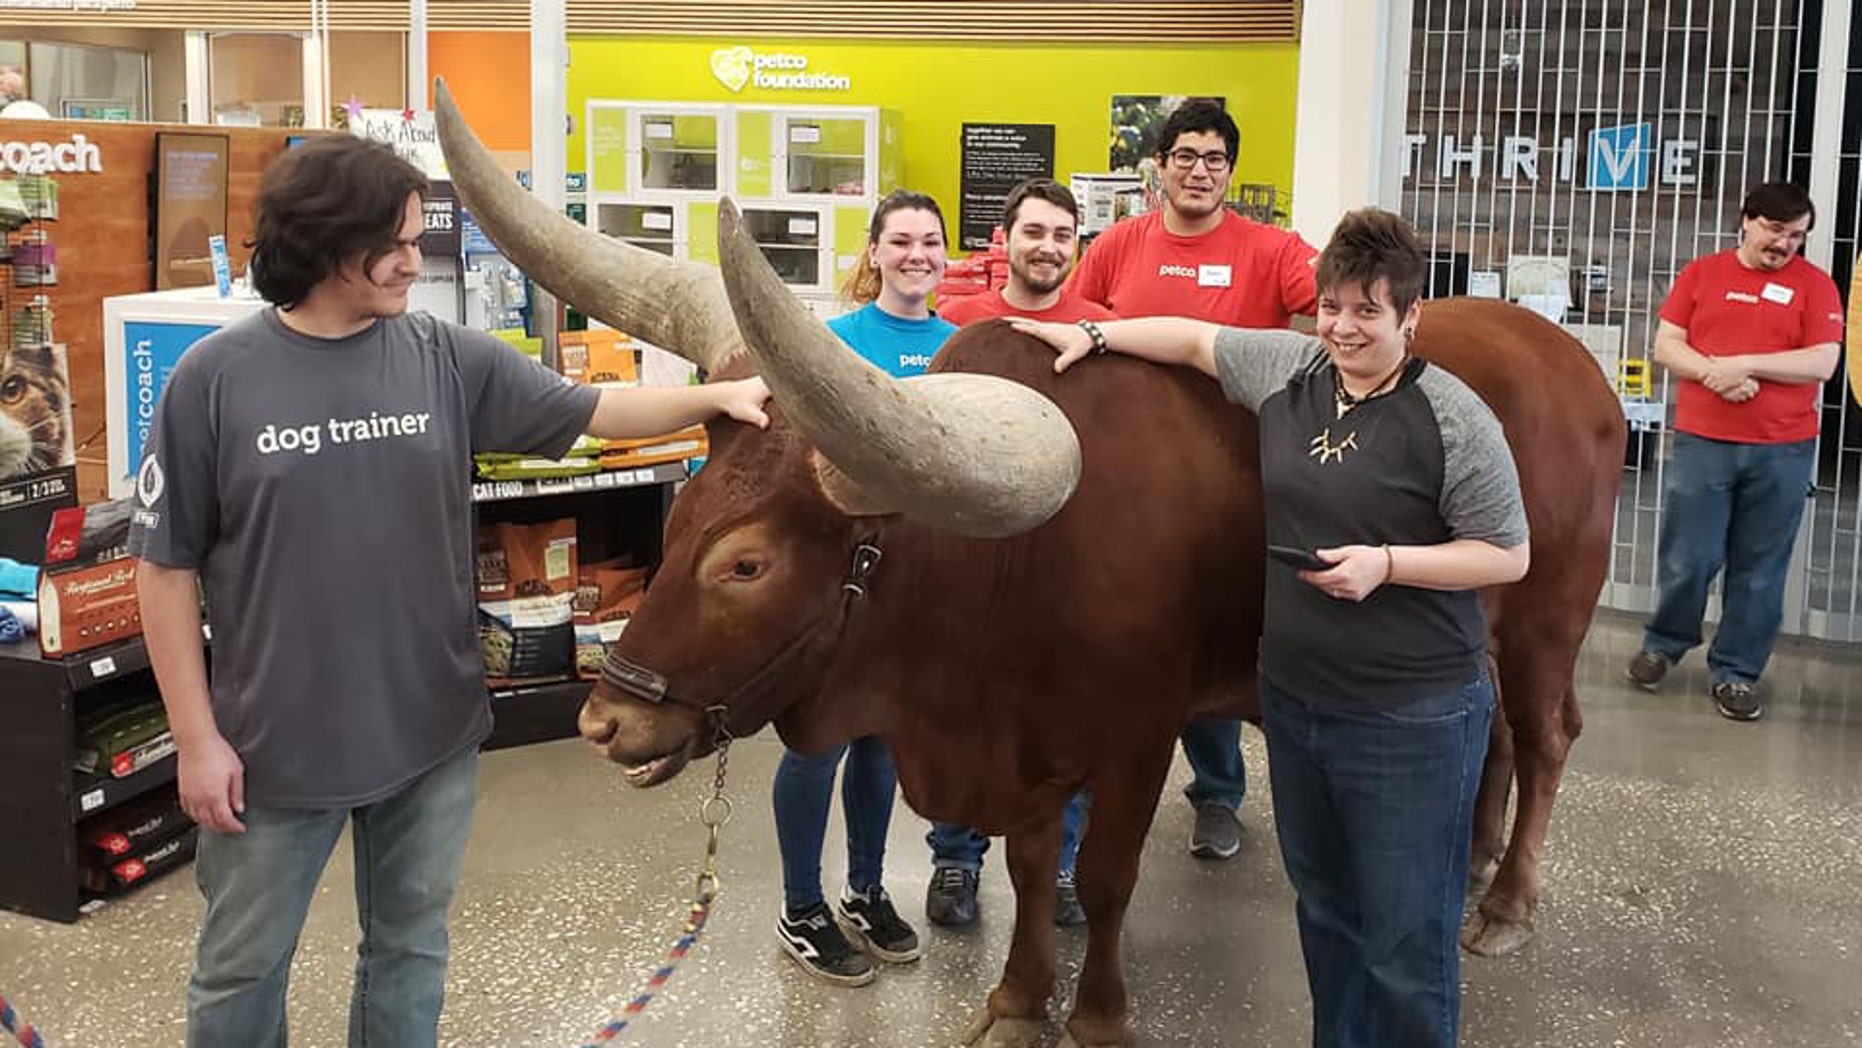 Texas man tests Petco’s ‘All leashed animals welcome’ policy with giant steer